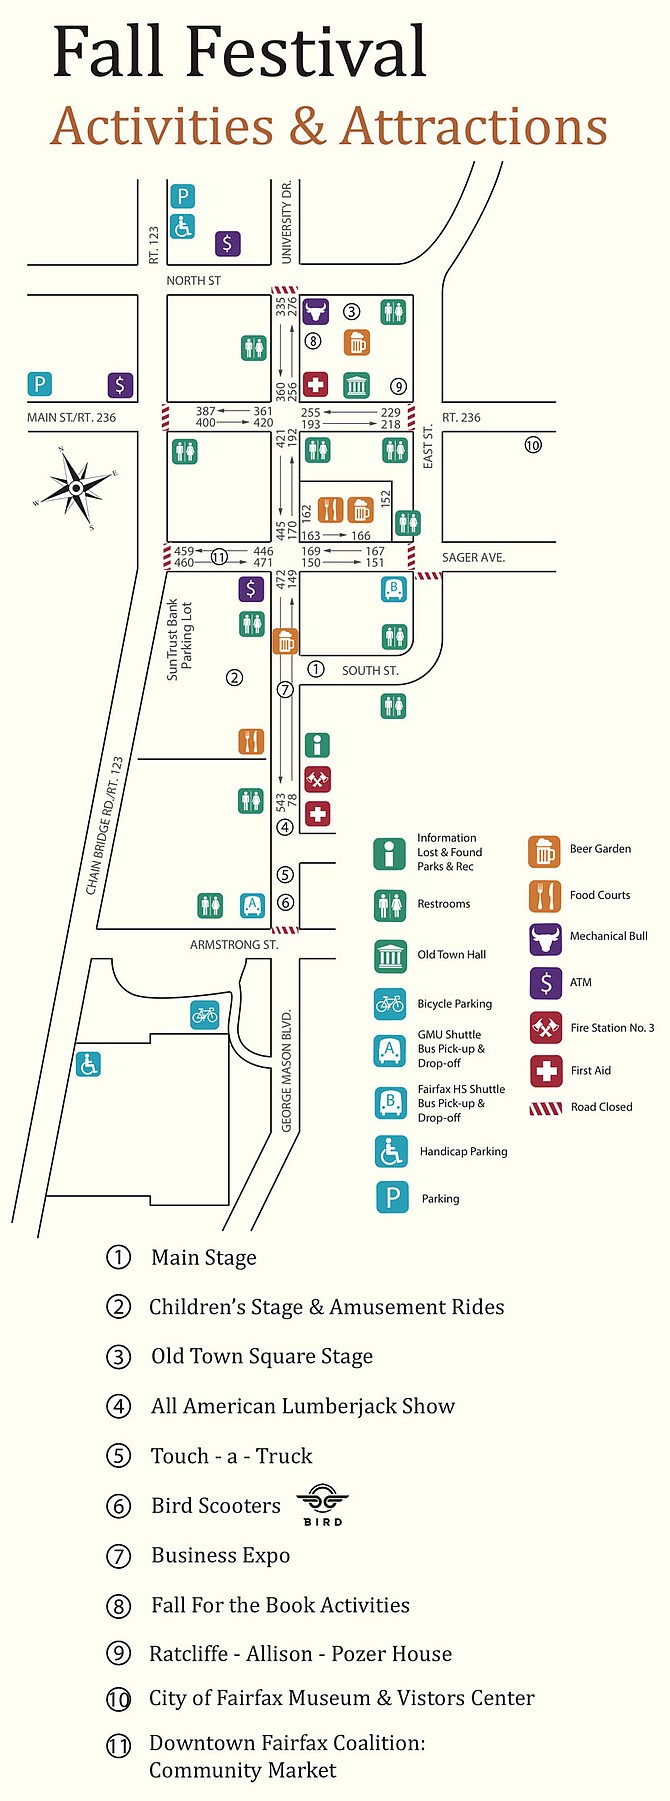 Event map of the 2019 Fairfax Fall Festival.